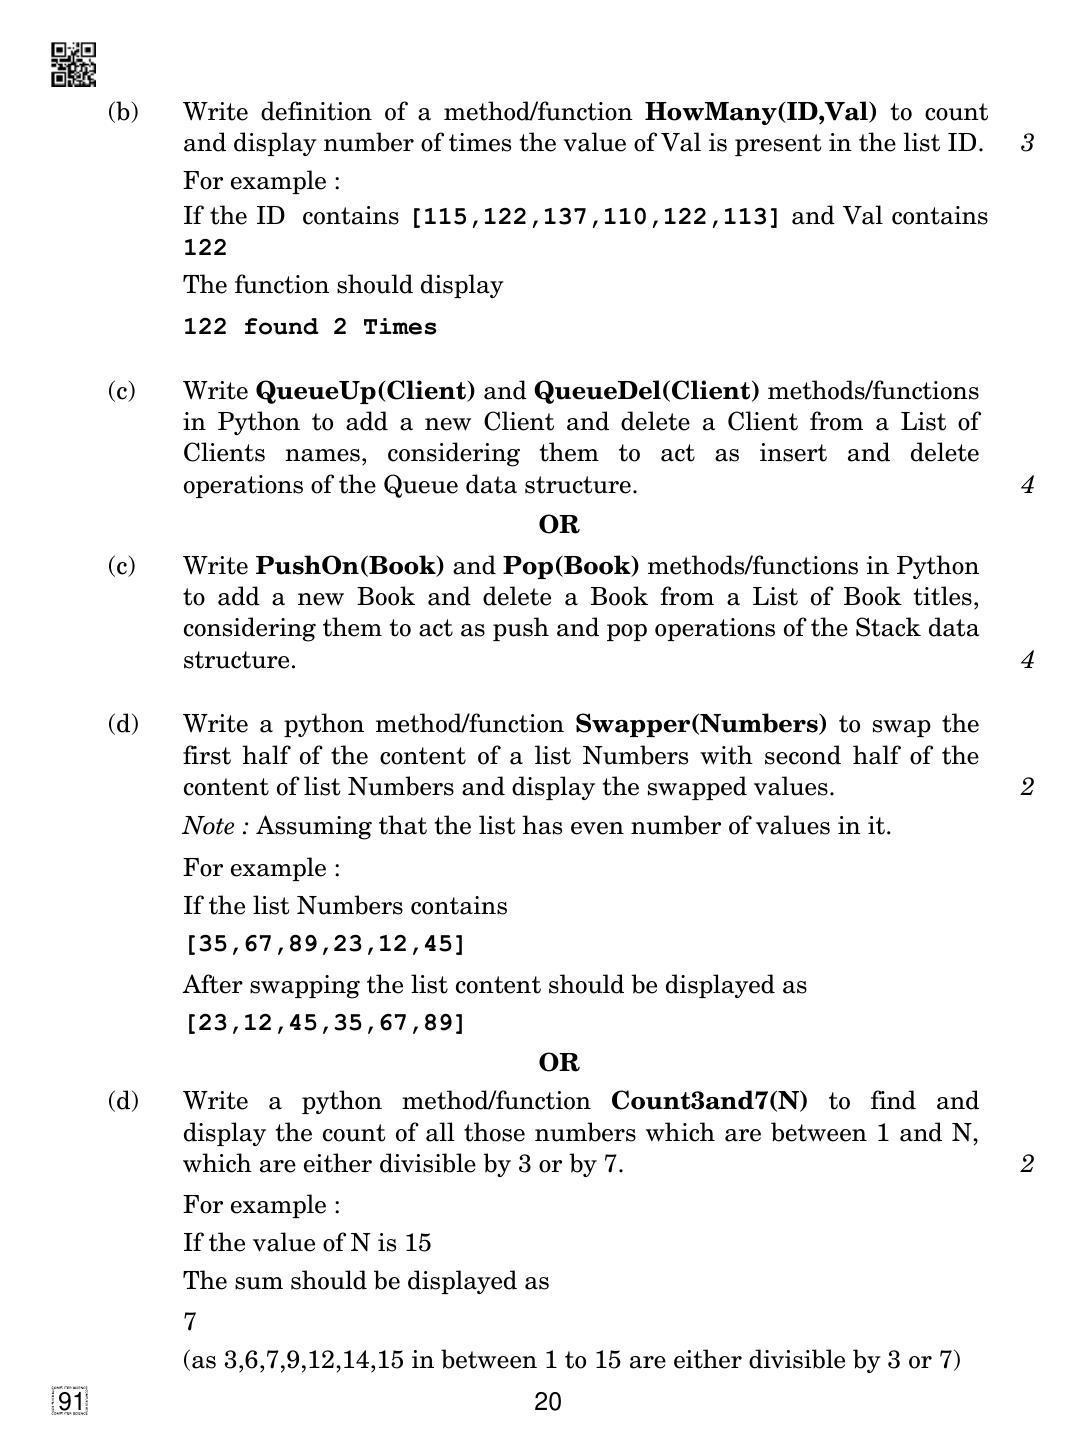 CBSE Class 12 91 Computer Science 2019 Question Paper - Page 20